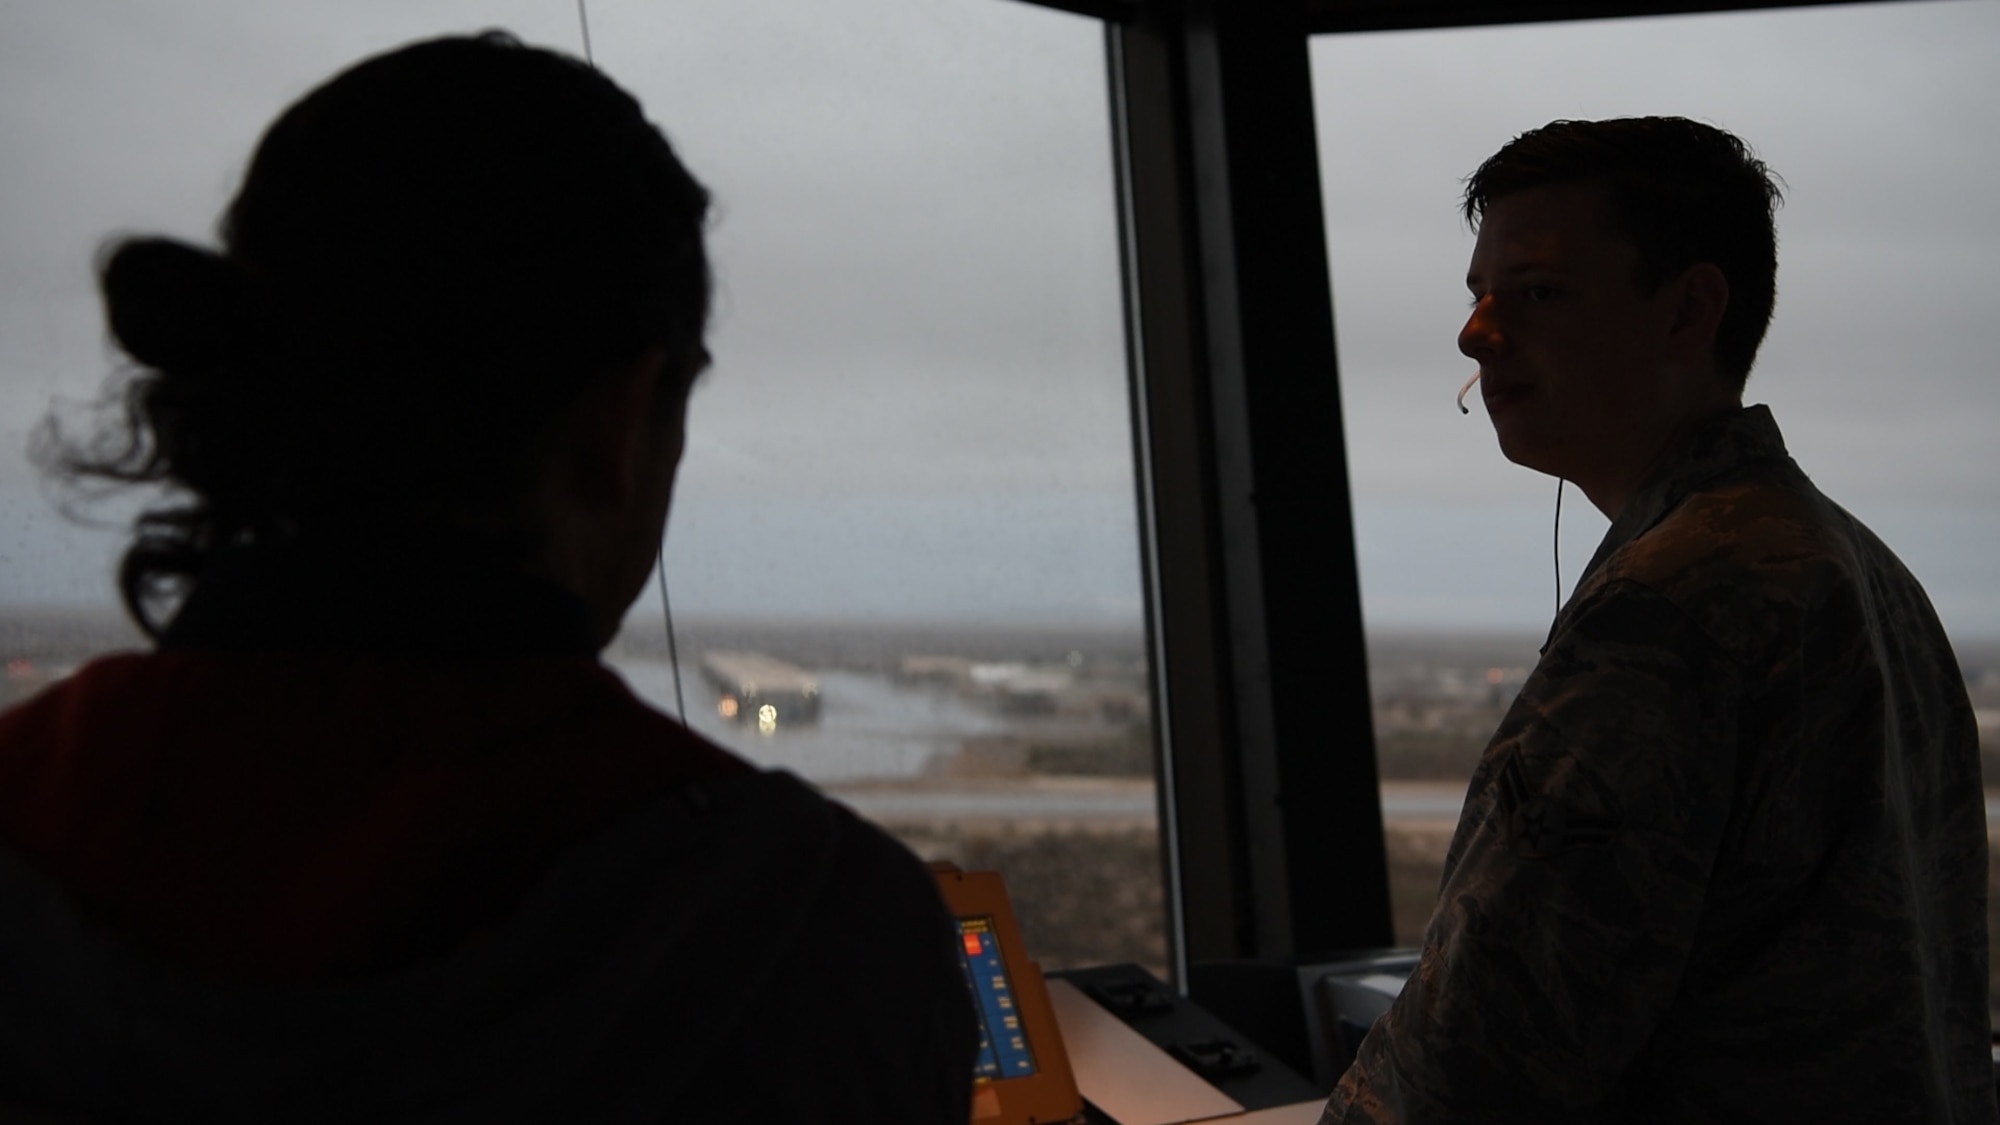 (From left to right) Edward Morse, 54th Operations Support Squadron air traffic controller, observes as Airman 1st Class Joseph Pannetti, 54th OSS air traffic control trainee, gives a traffic call, Dec. 18, on Holloman Air Force Base, N.M. Controllers are not authorized to give traffic calls without at least a 5-level air traffic controller observing them (U.S. Air Force photo by Staff Sgt. BreeAnn Sachs)